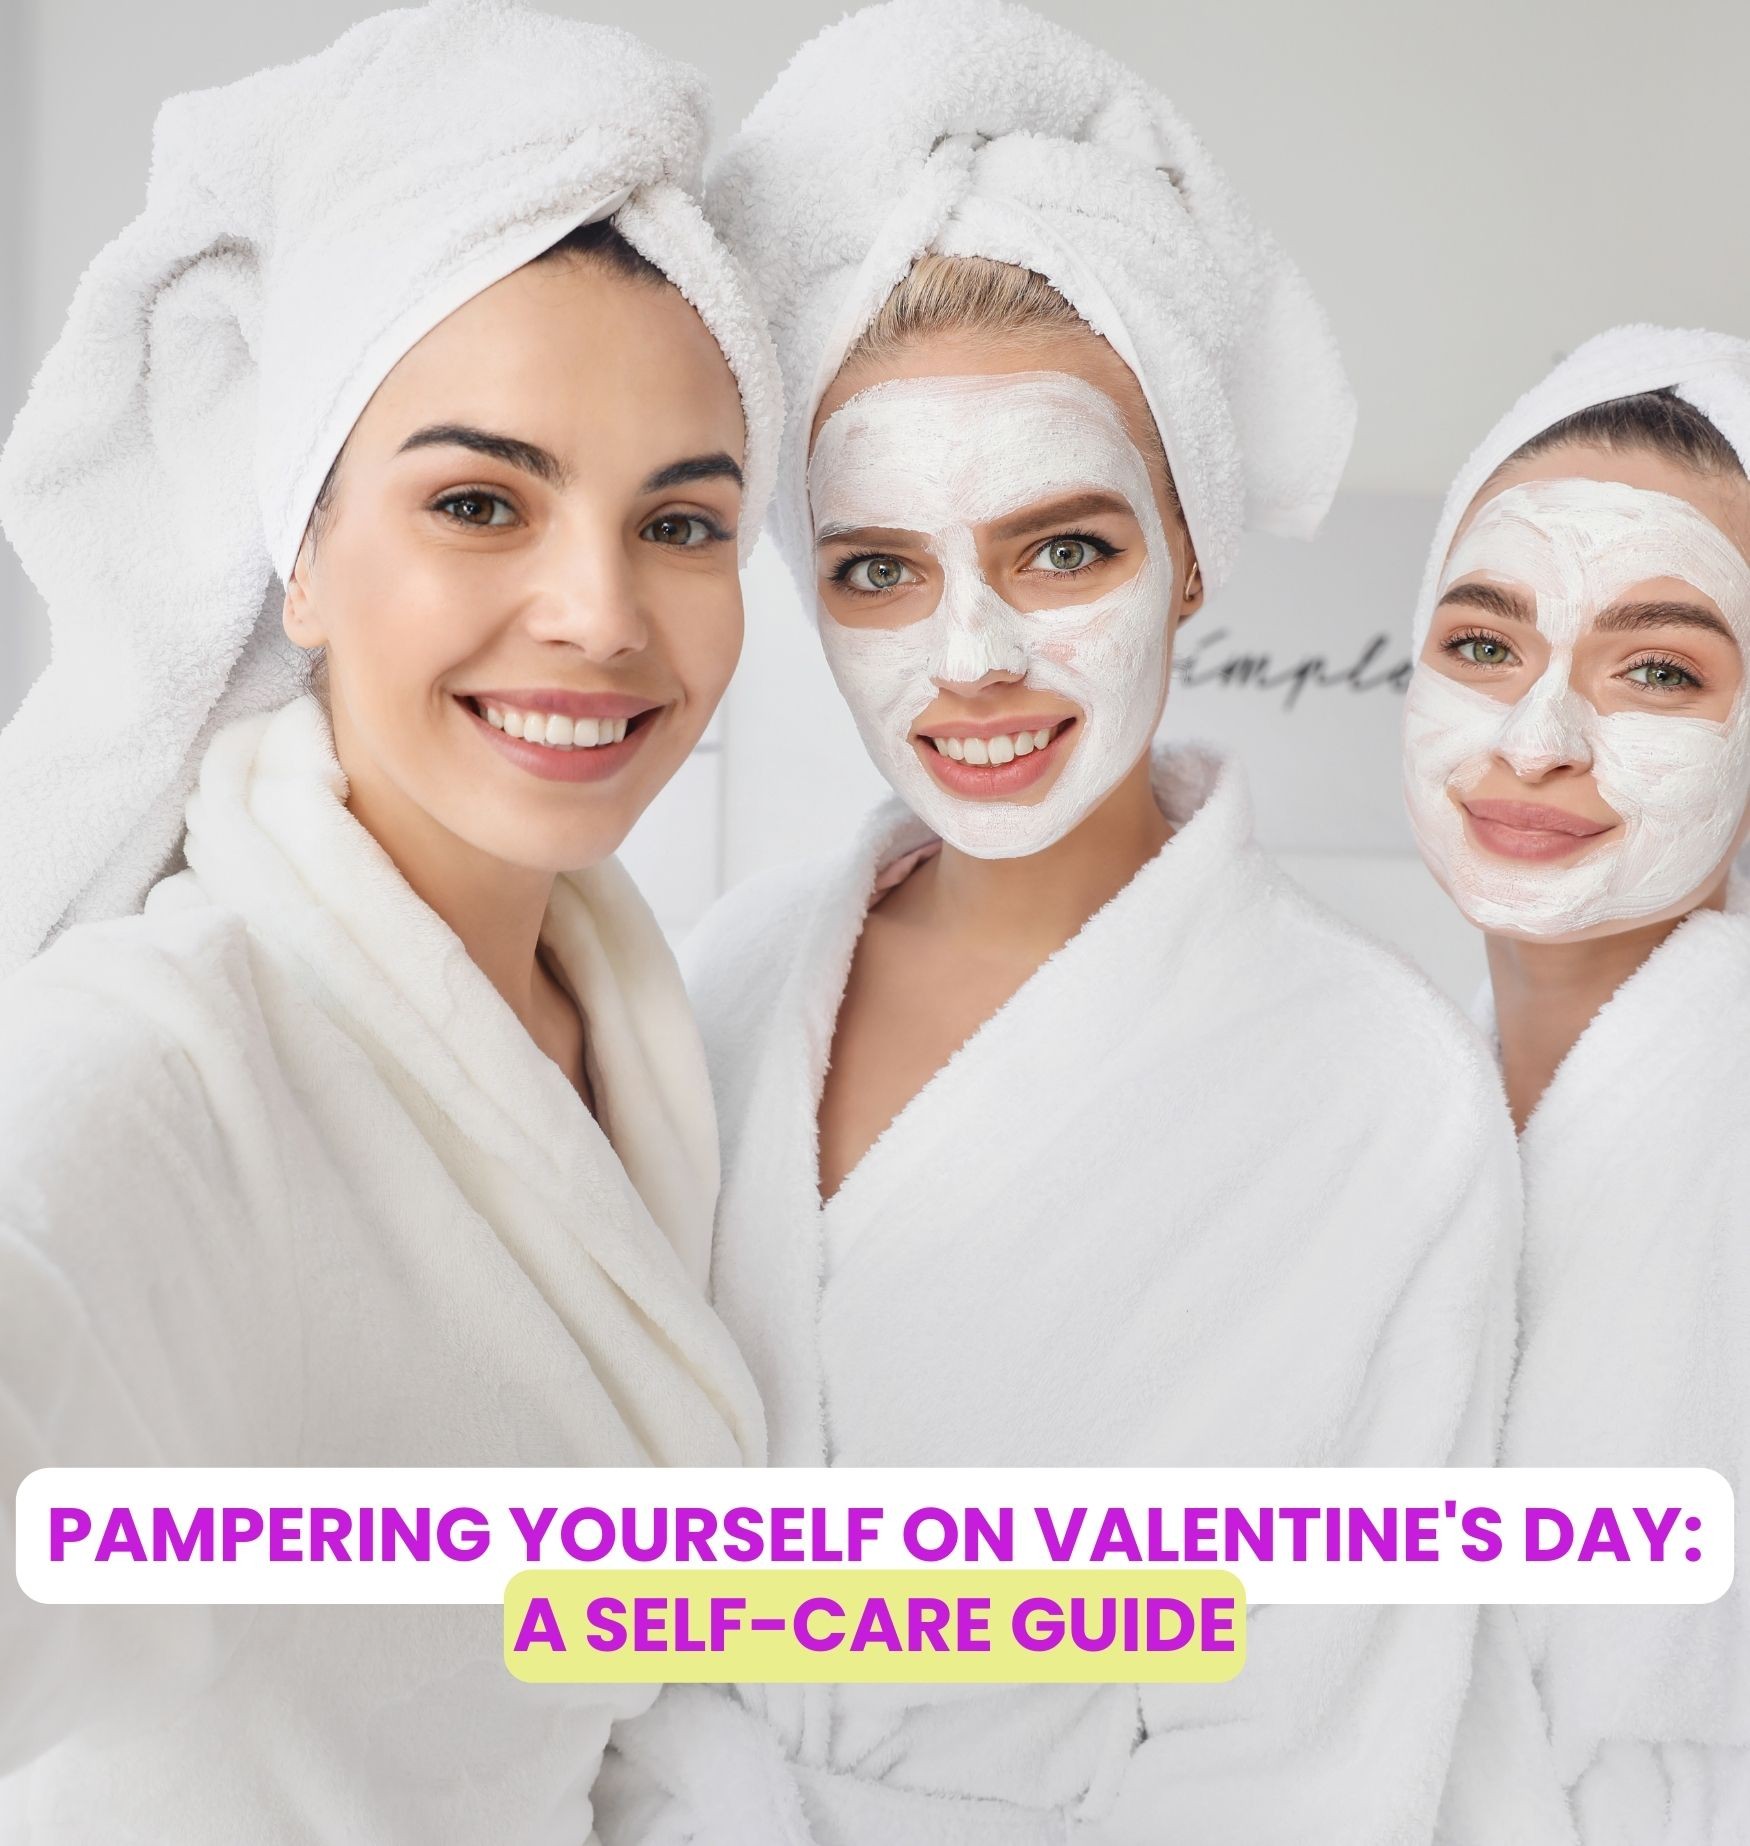 Pampering Yourself on Valentine's Day: A Self-Care Guide